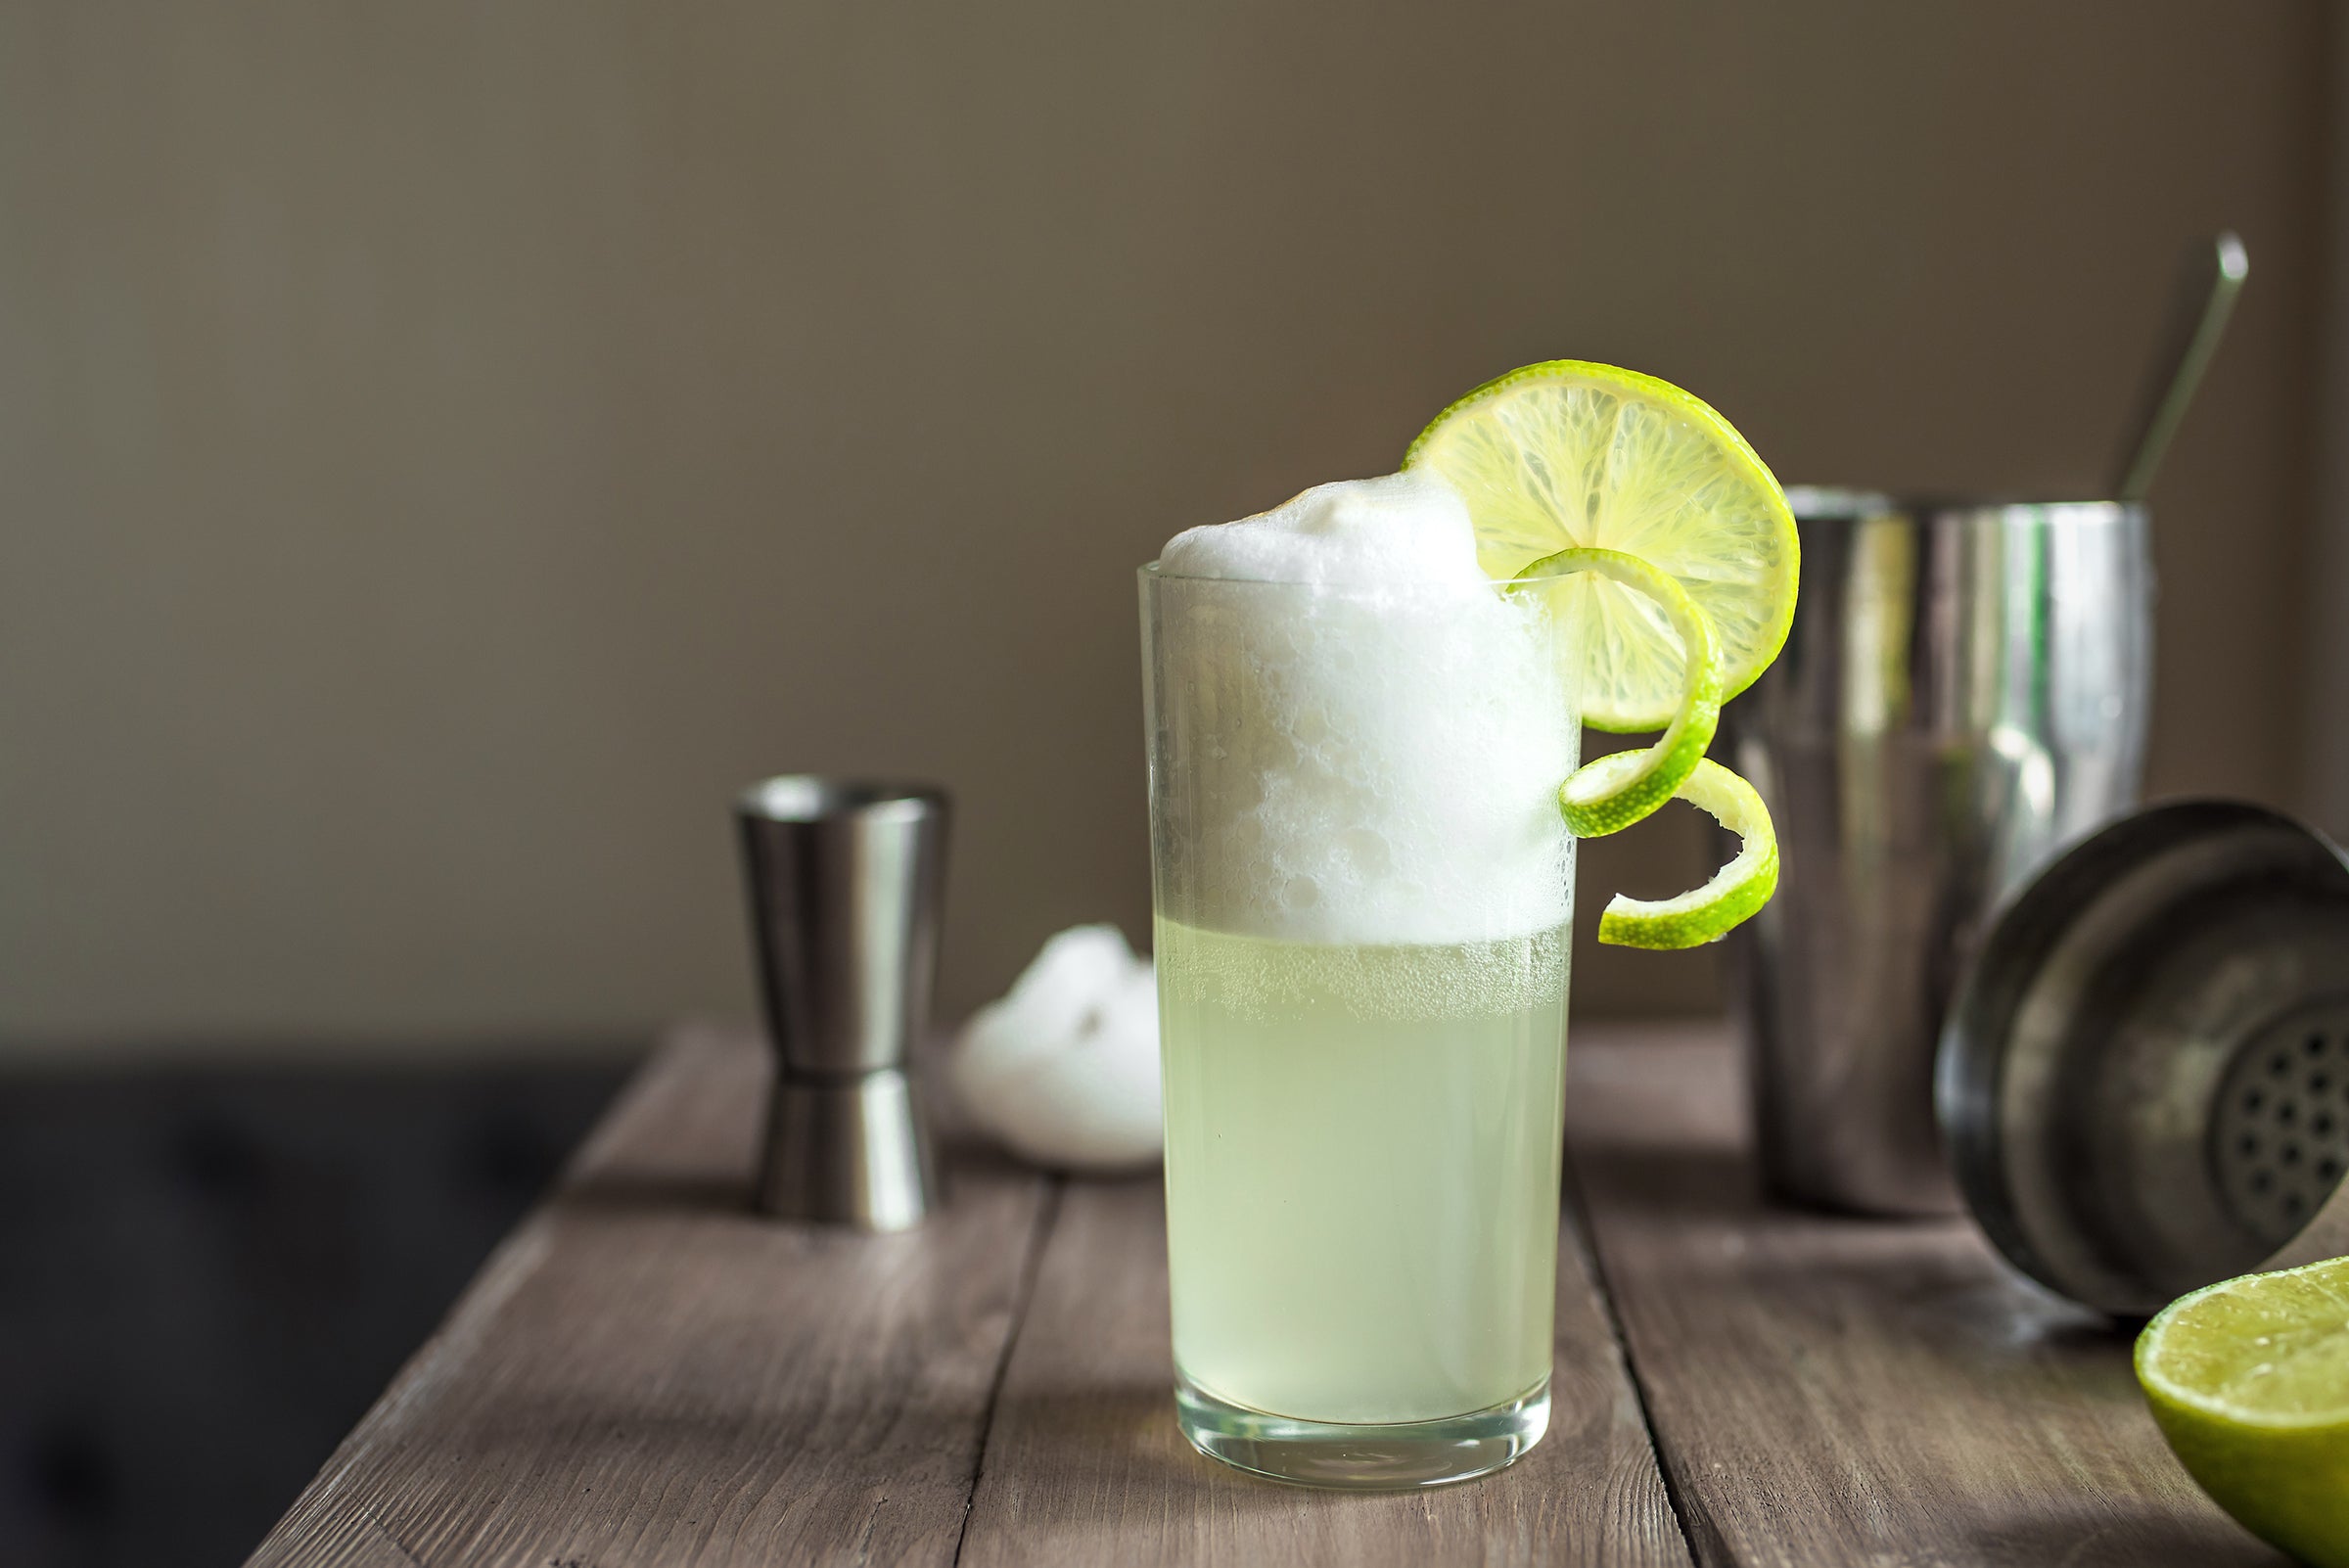 A pale yellow gin fizz cocktail that has a nice frothy head with lime wheel and twist garnish, with steel cocktail tools in the background, on a grey wood table.